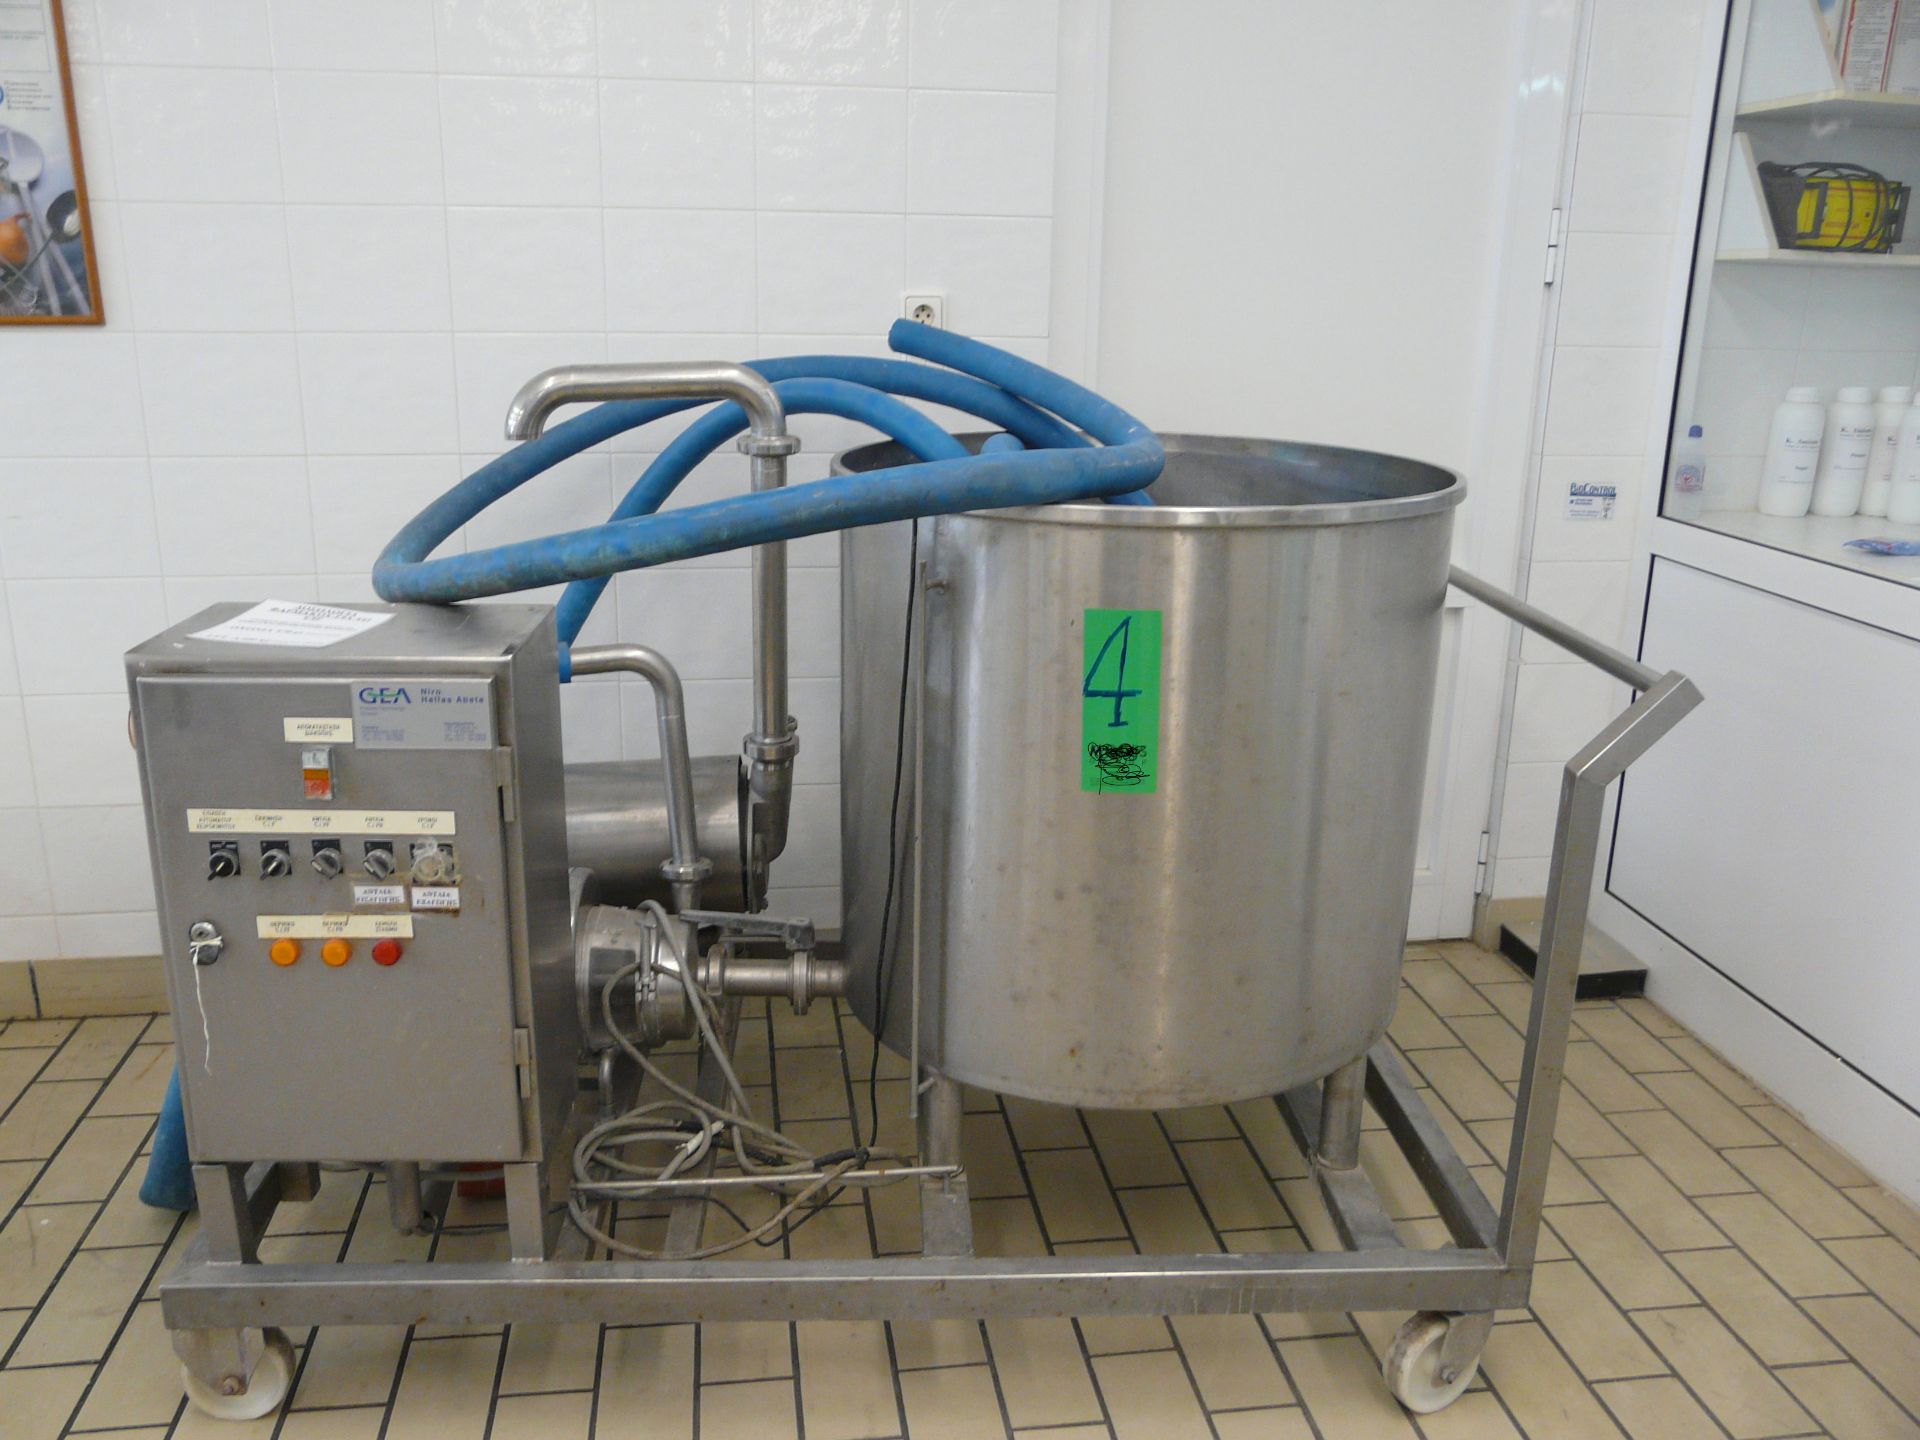 CIP for the Ice Cream Freezers Semi automatic , Manufacturer : GEA NIRO ,Comes with control